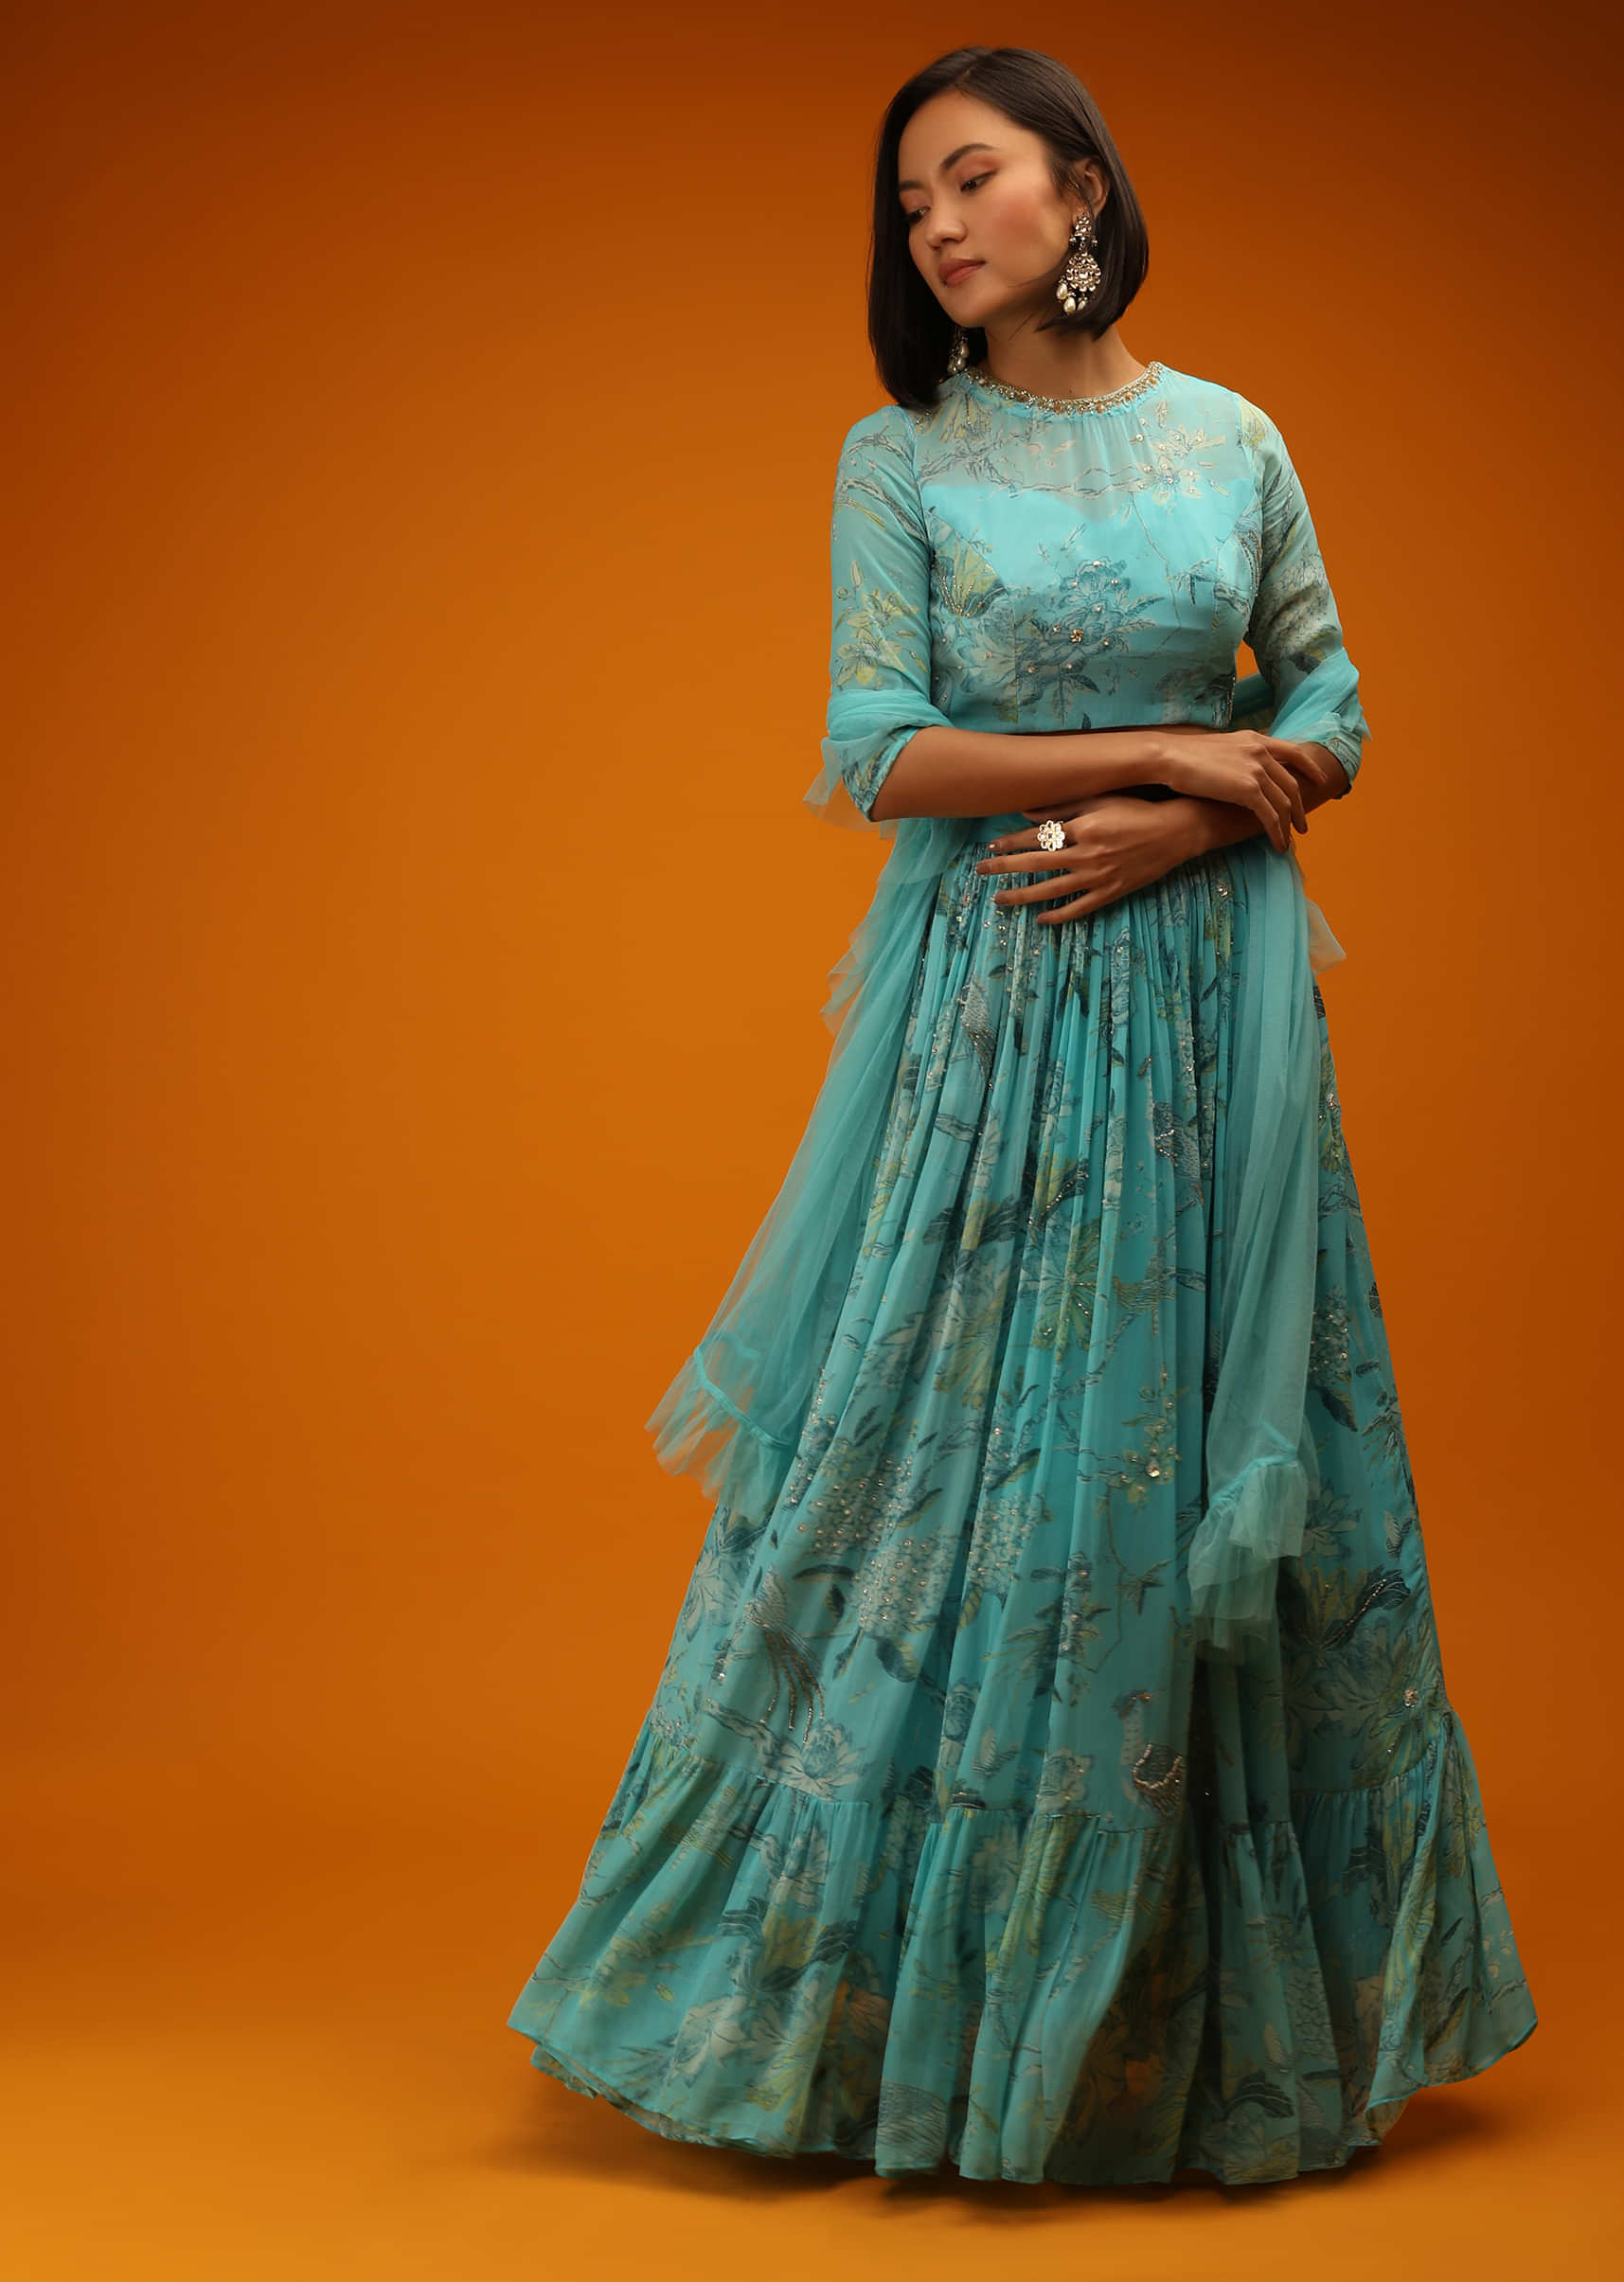 Capri Blue Lehenga Choli In Georgette With Floral Print And Sequin Accents